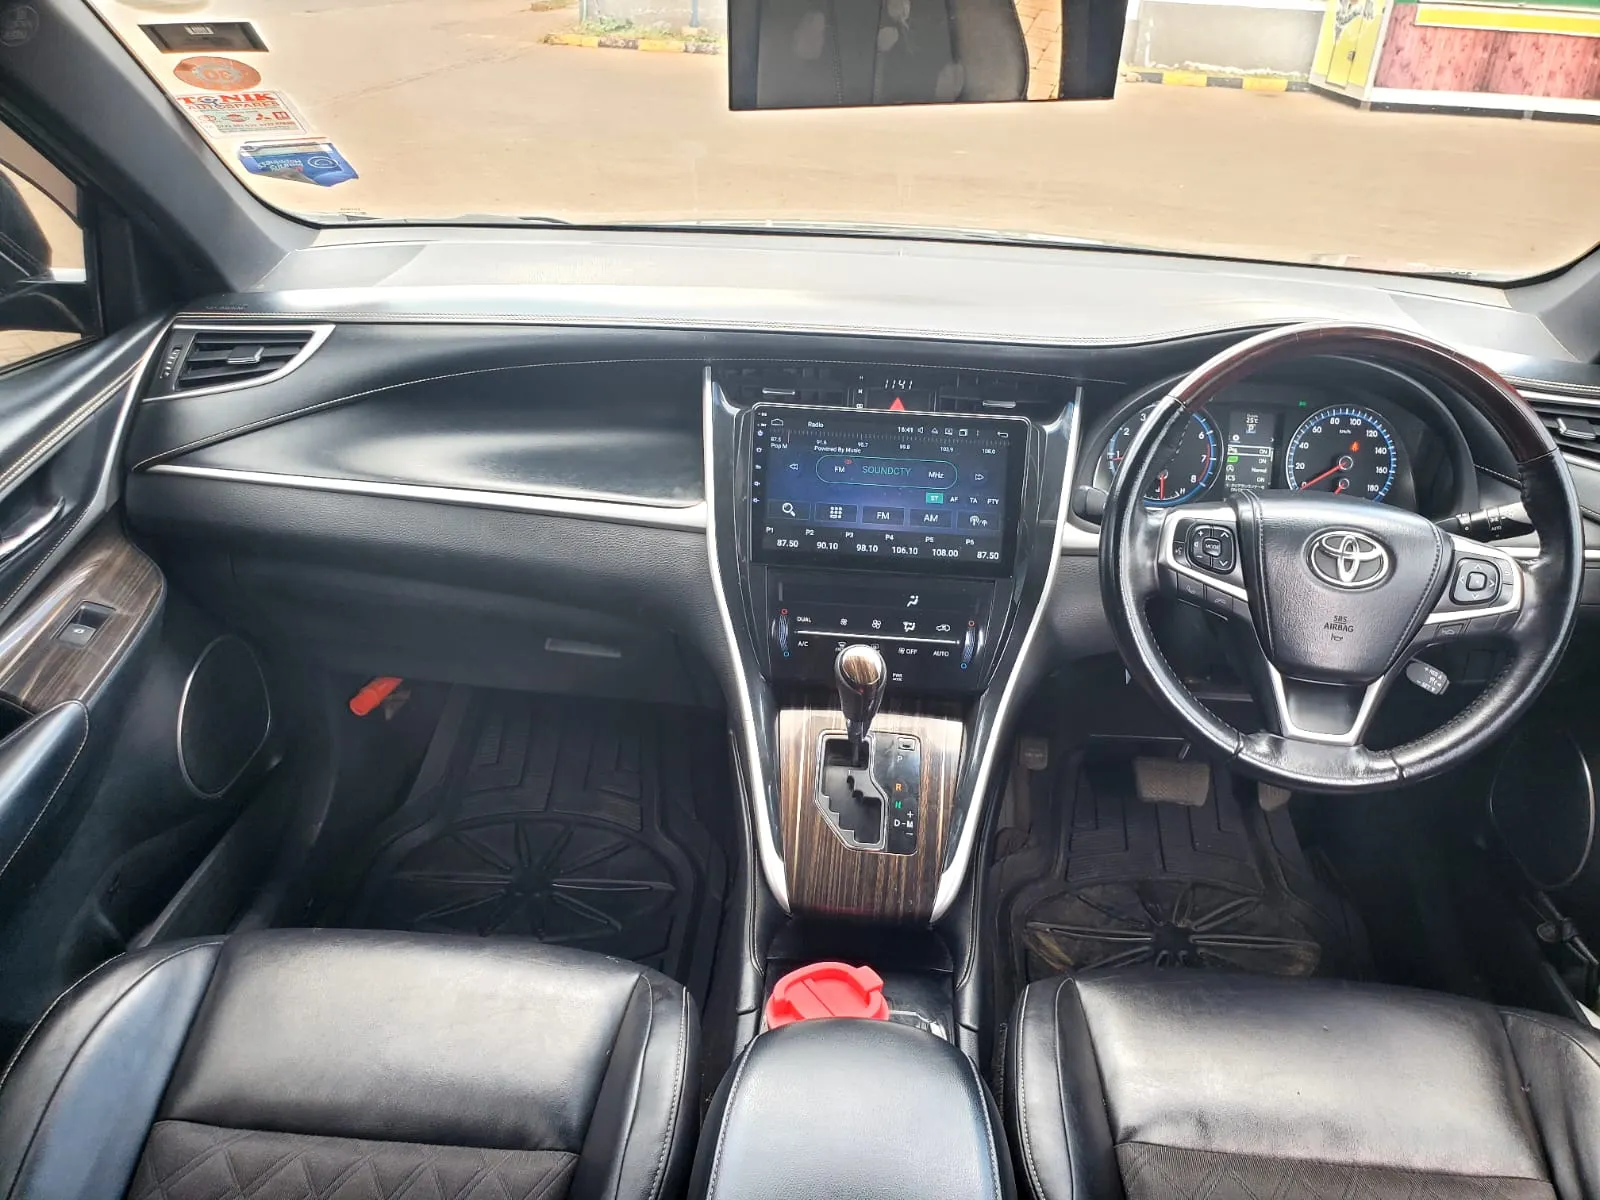 Toyota Harrier 2014 You Pay 30% Deposit Trade in OK EXCLUSIVE!